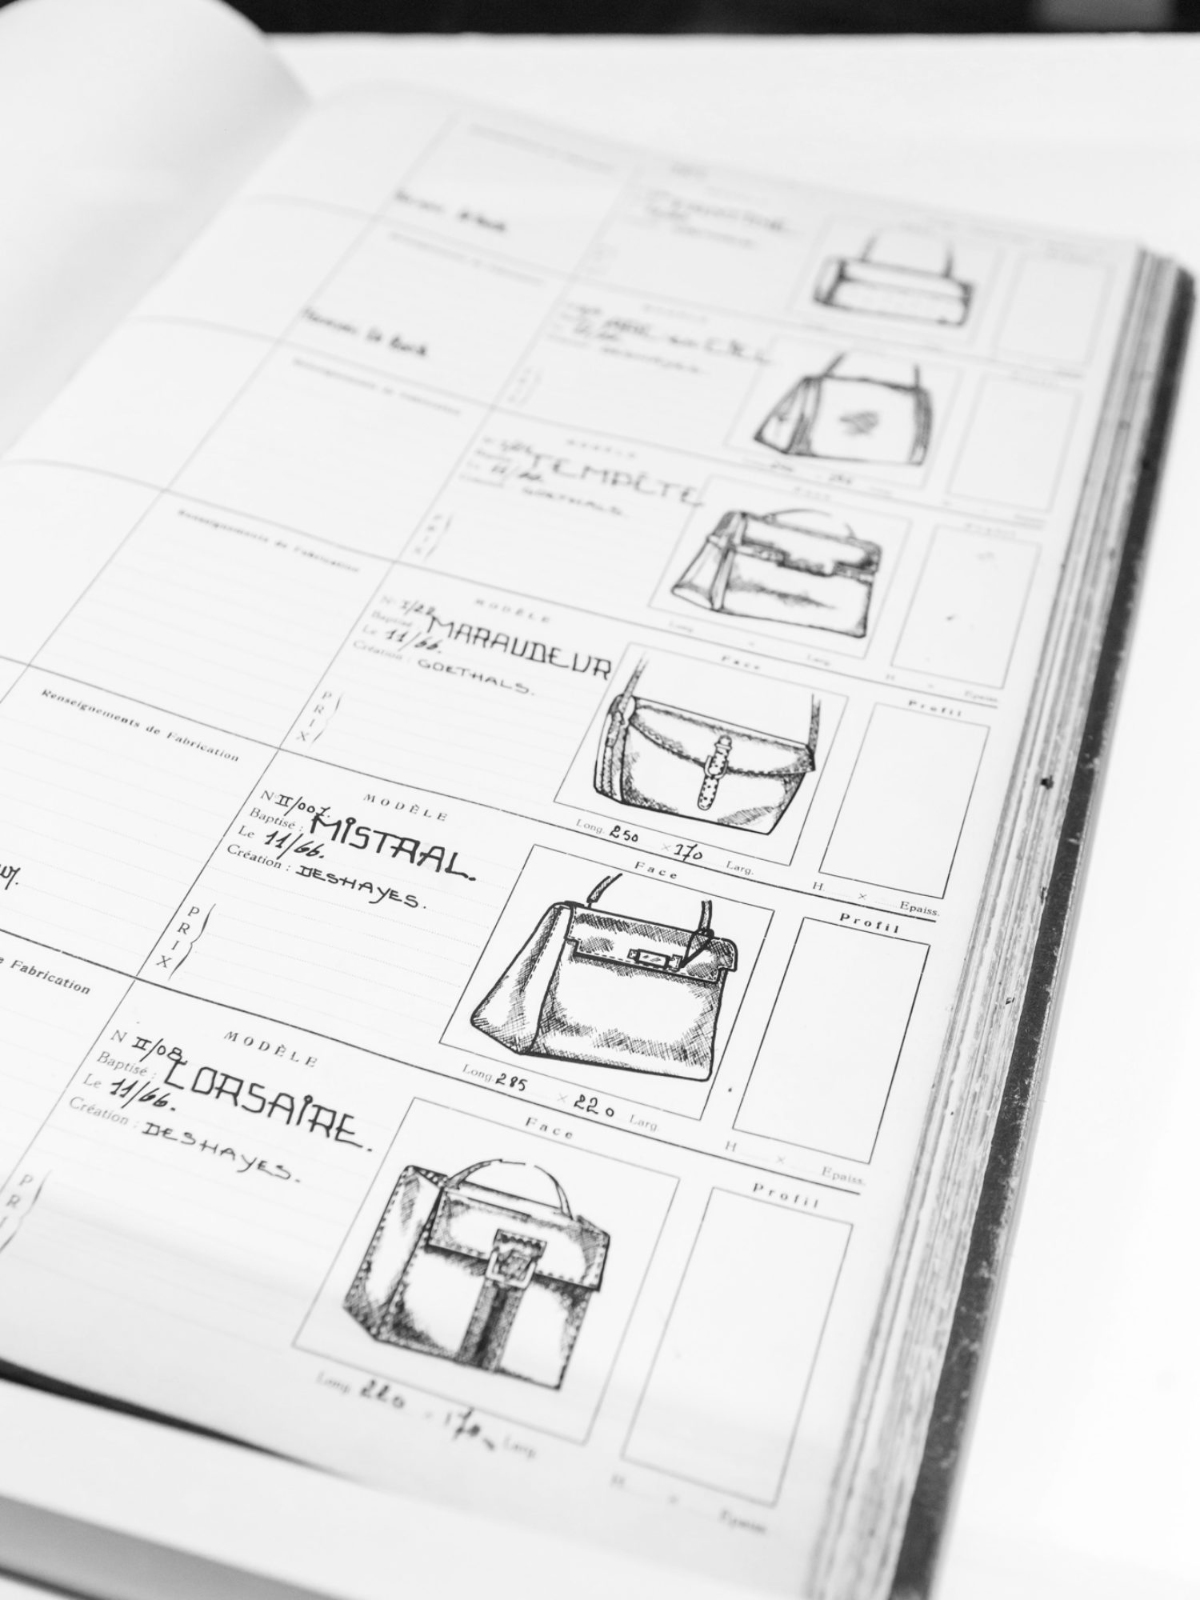 Did you know that Delvaux is the oldest luxury leather goods